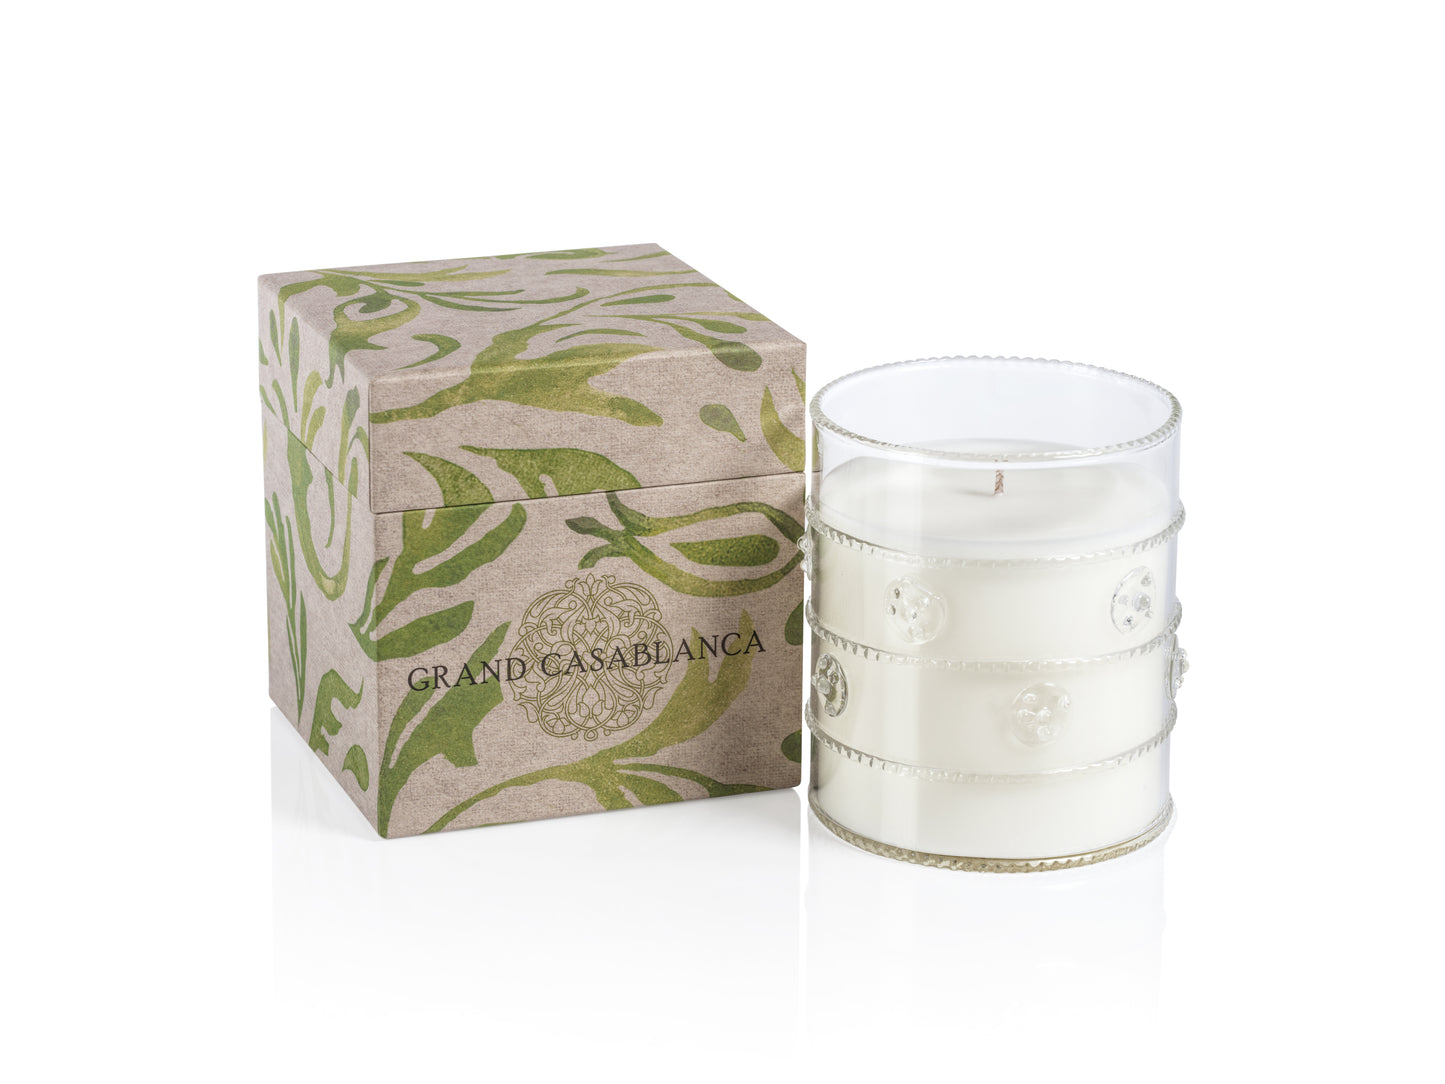 WILD TUBEROSE Zodax Grand Casablanca Scented Candle 12 oz - Gift Boxed